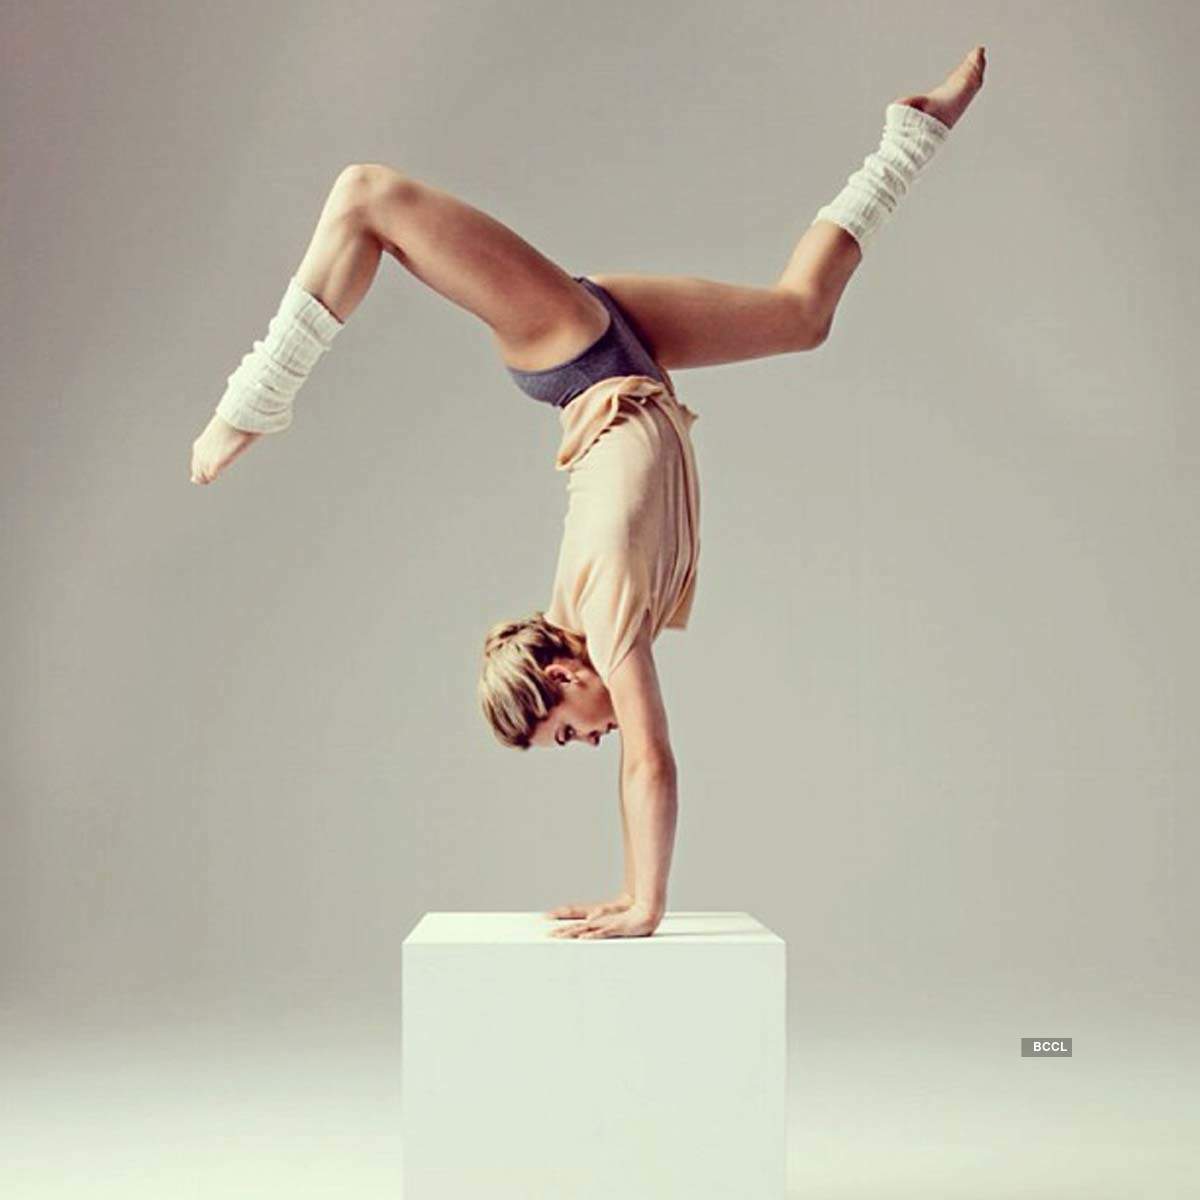 These pictures of super flexible gymnast Giulia Steingruber prove she is a human rubberband